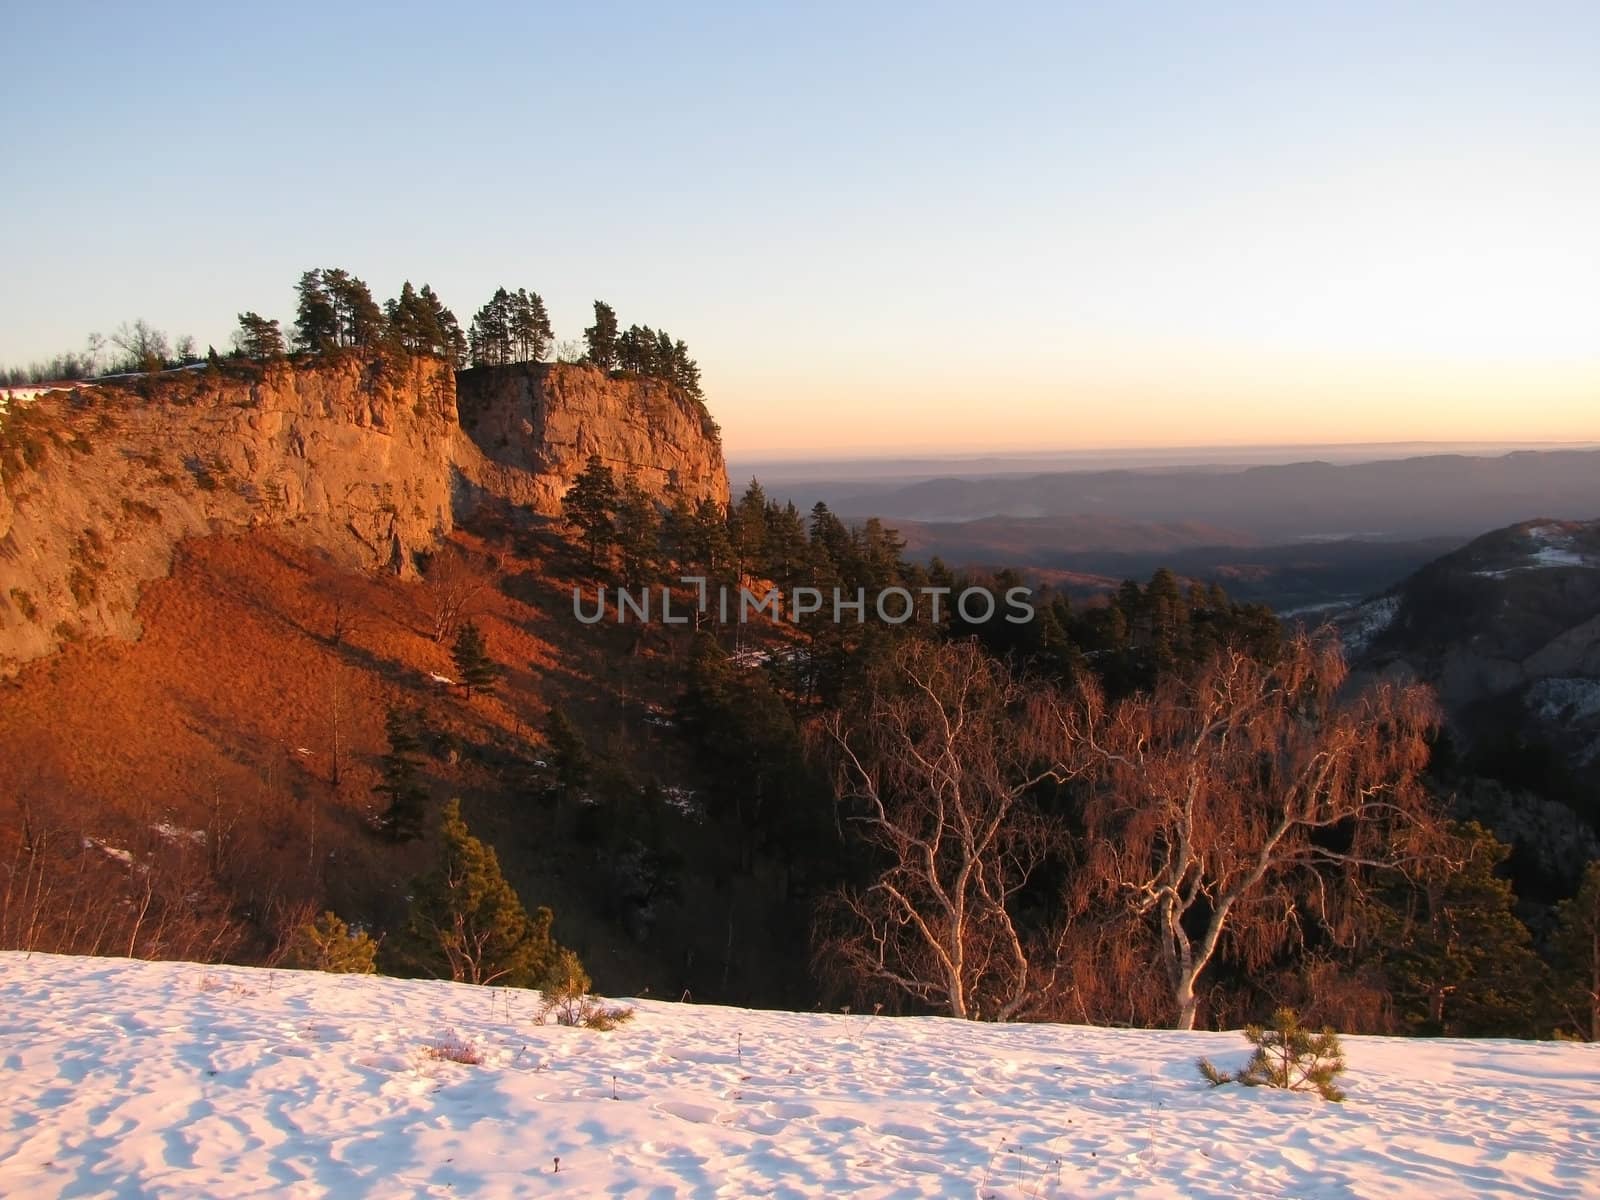 Mountains, caucasus, rocks, a relief, a landscape, the nature, a panorama, a landscape, a ridge, top, breed, the sky, reserve, a background, a kind, a route, a slope, peak, beauty, bright, a file, tourism, travel, winter, a dawn, a decline, pines, firs, snow, wood, trees
